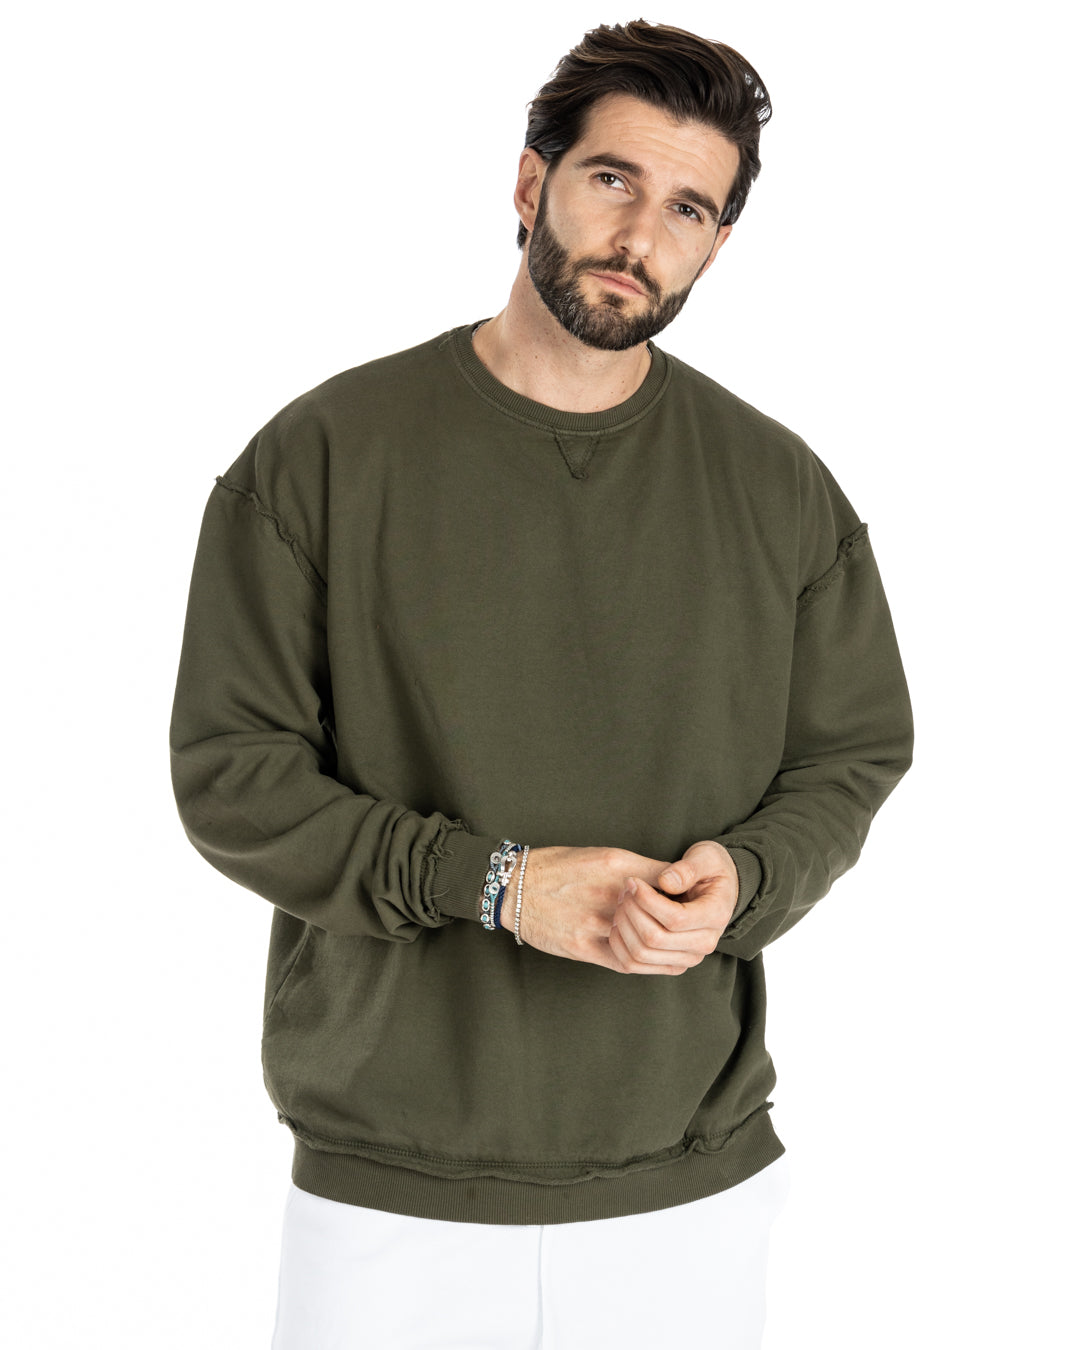 KYOTO - OVERSIZED SWEATSHIRT WITH VISIBLE GREEN STITCHING